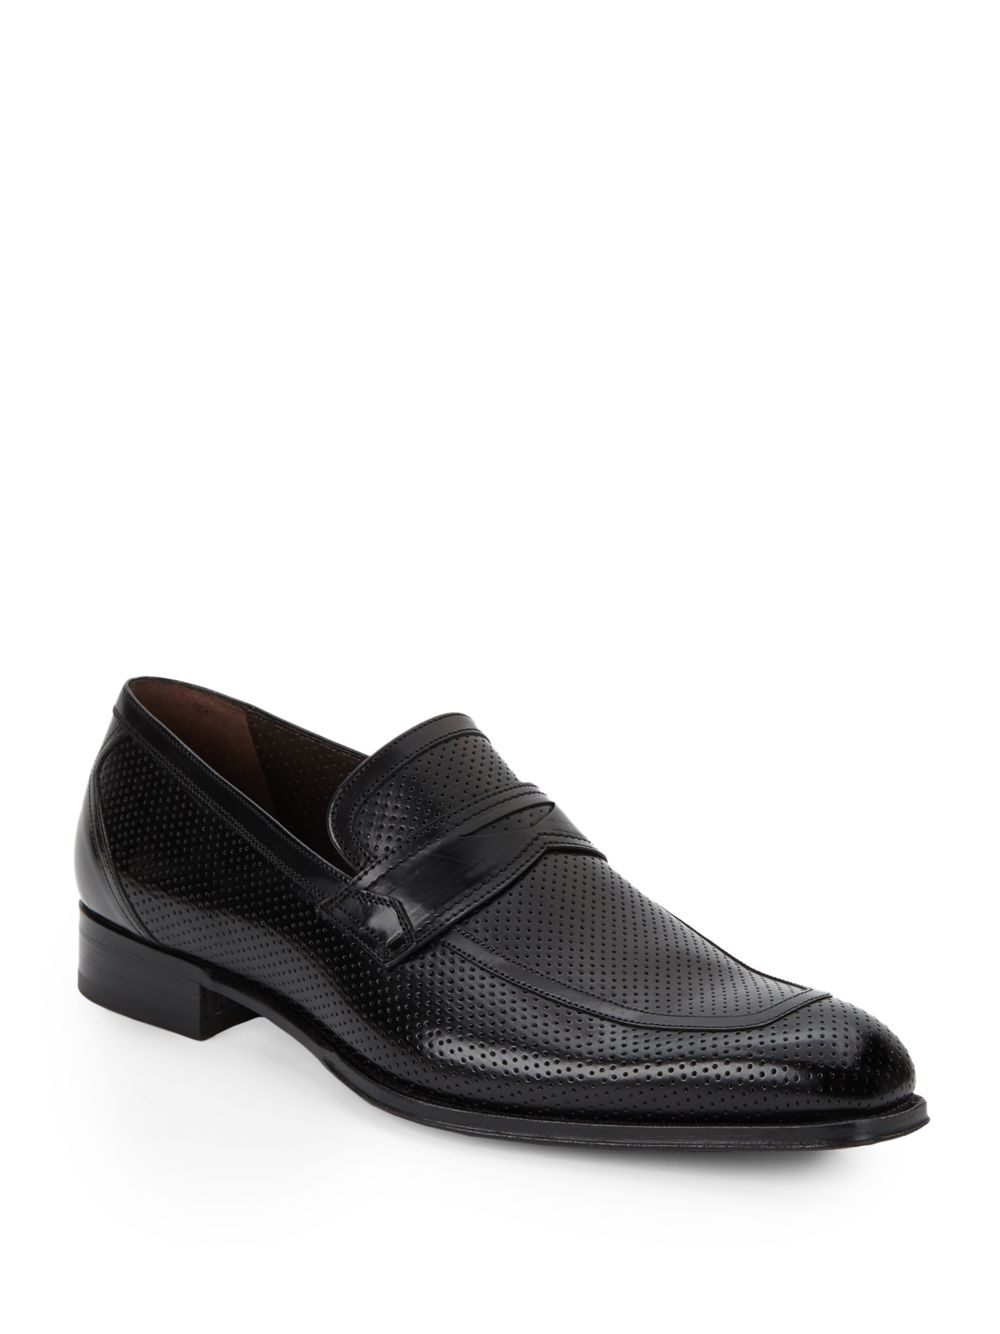 Mezlan Perforated Leather Loafers in Black for Men - Lyst